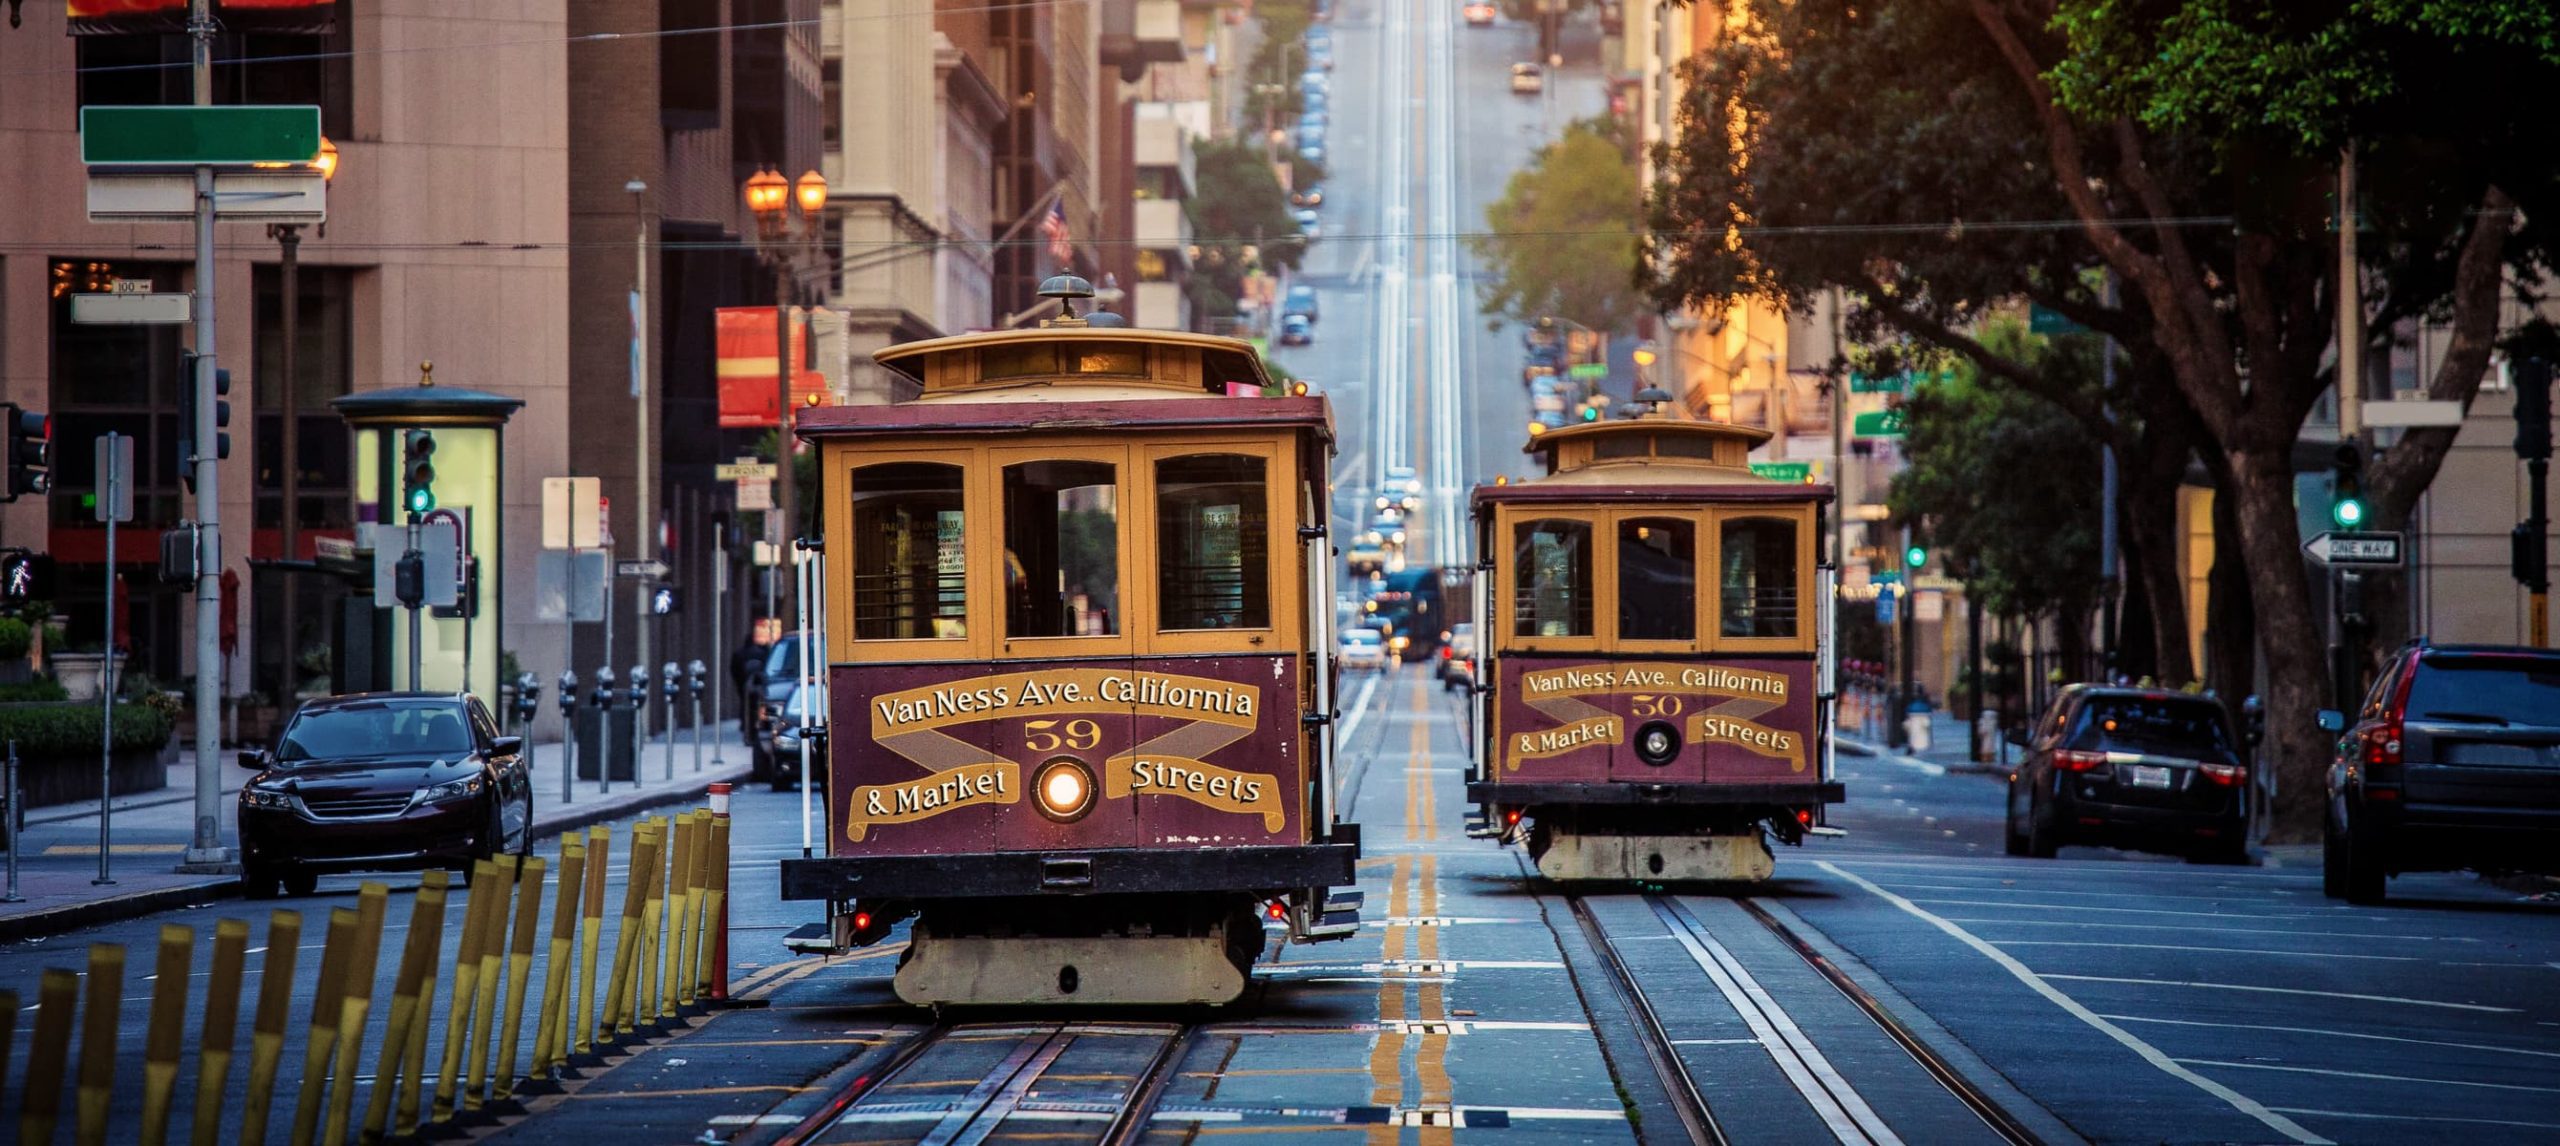 The 18 Top Attractions in San Francisco, California